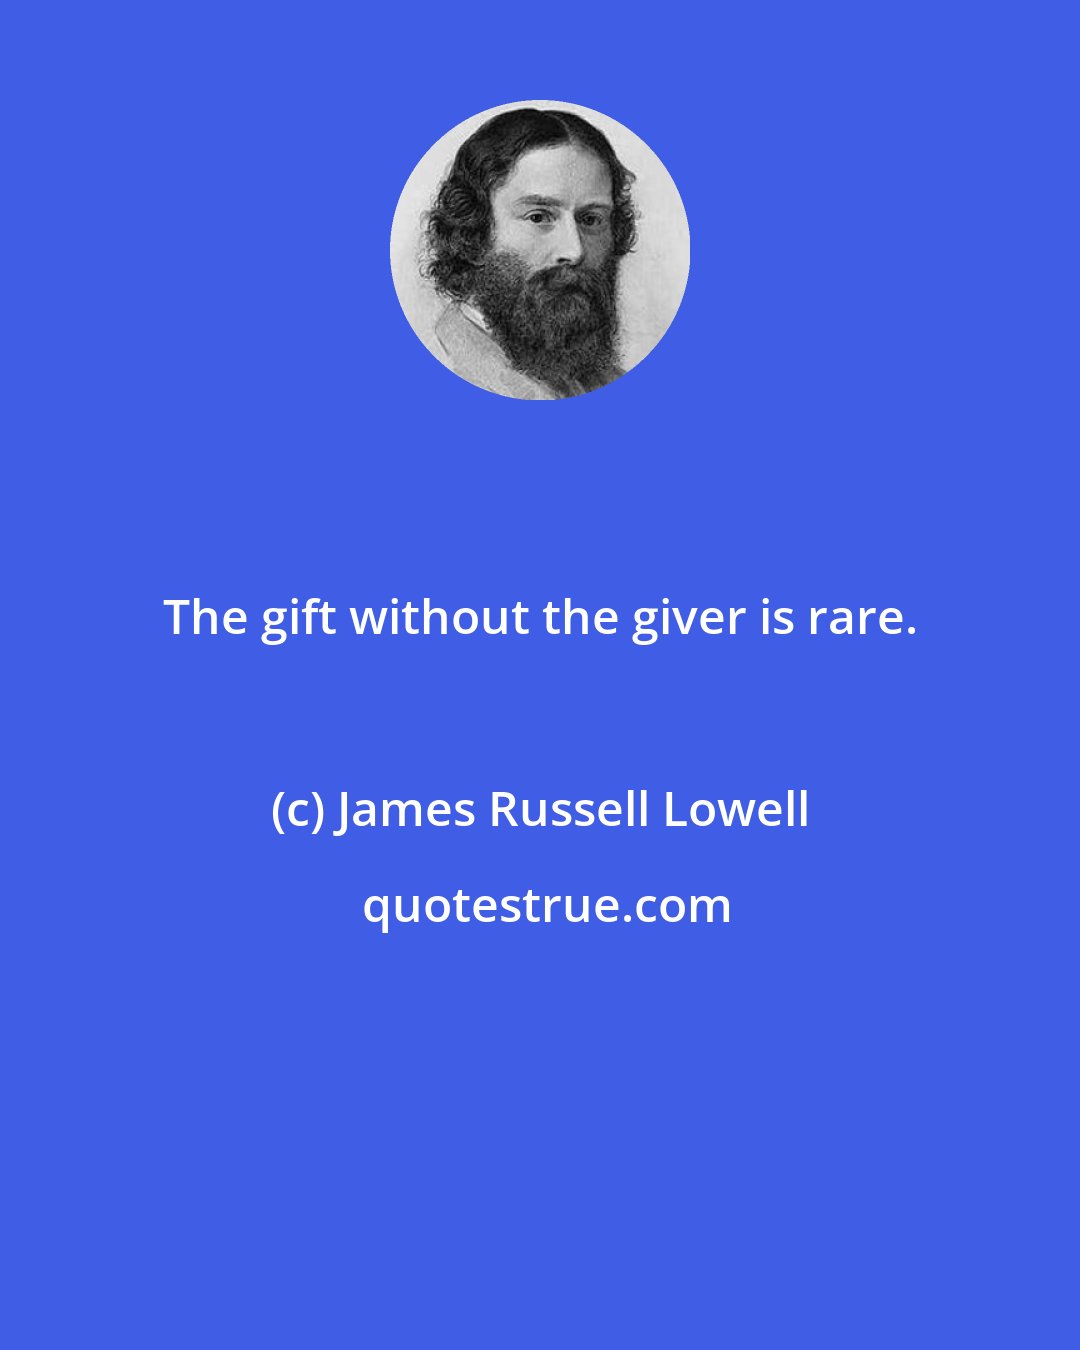 James Russell Lowell: The gift without the giver is rare.